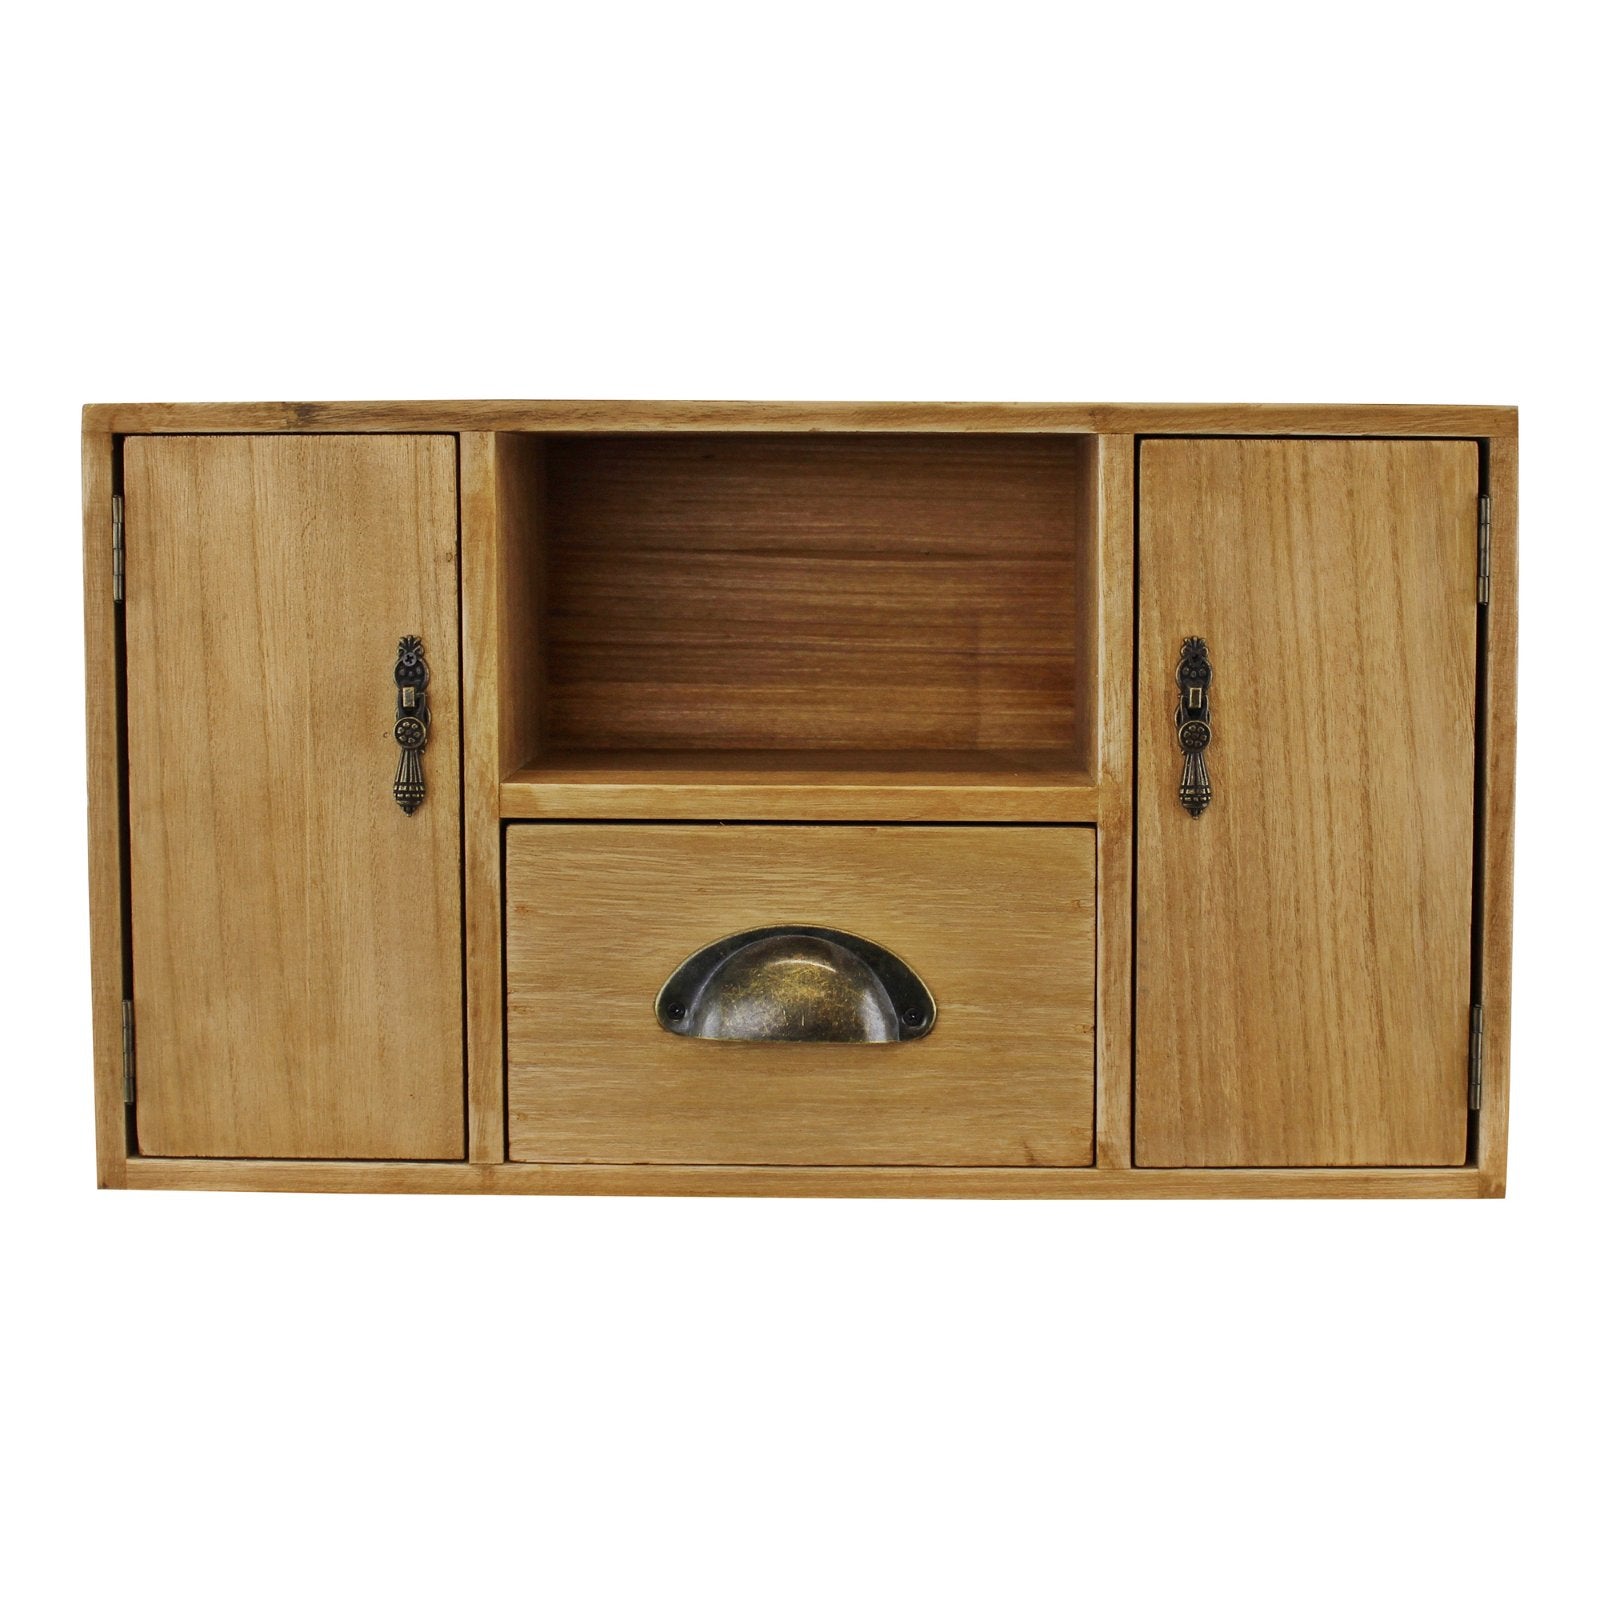 Small Wooden Cabinet with Cupboards, Drawer and Shelf